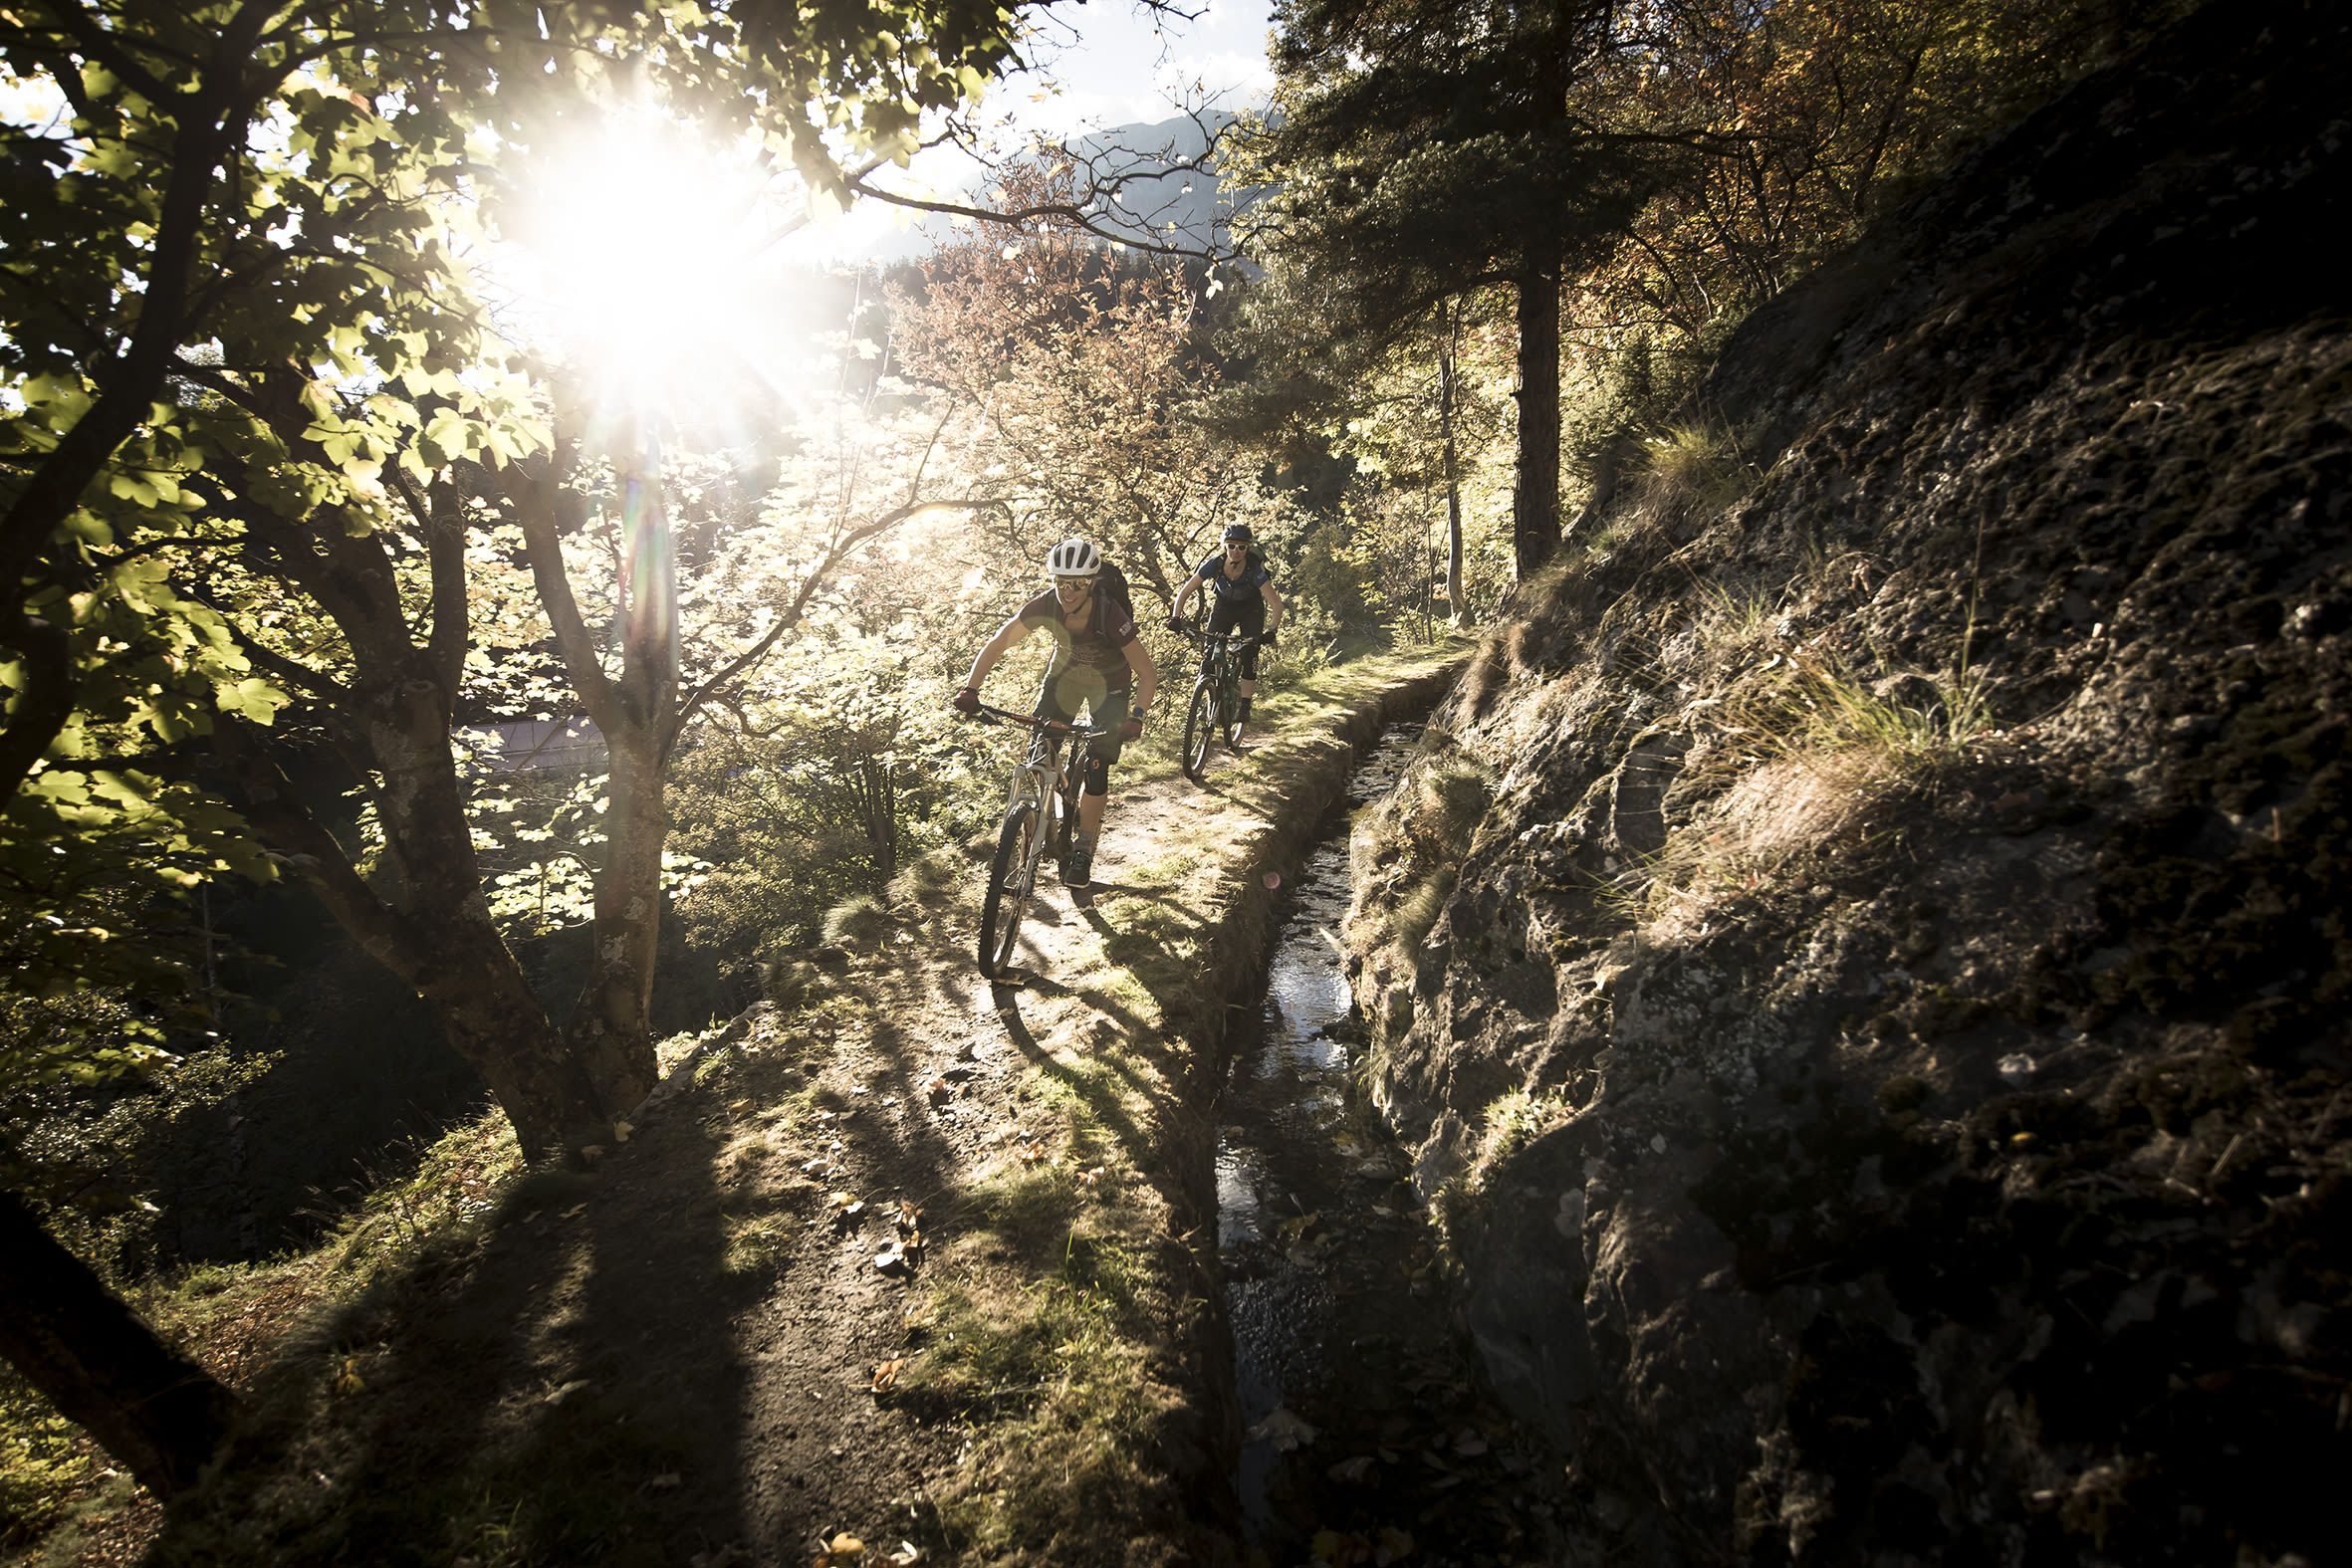 Mountainbikers on trails above Brig, Valais